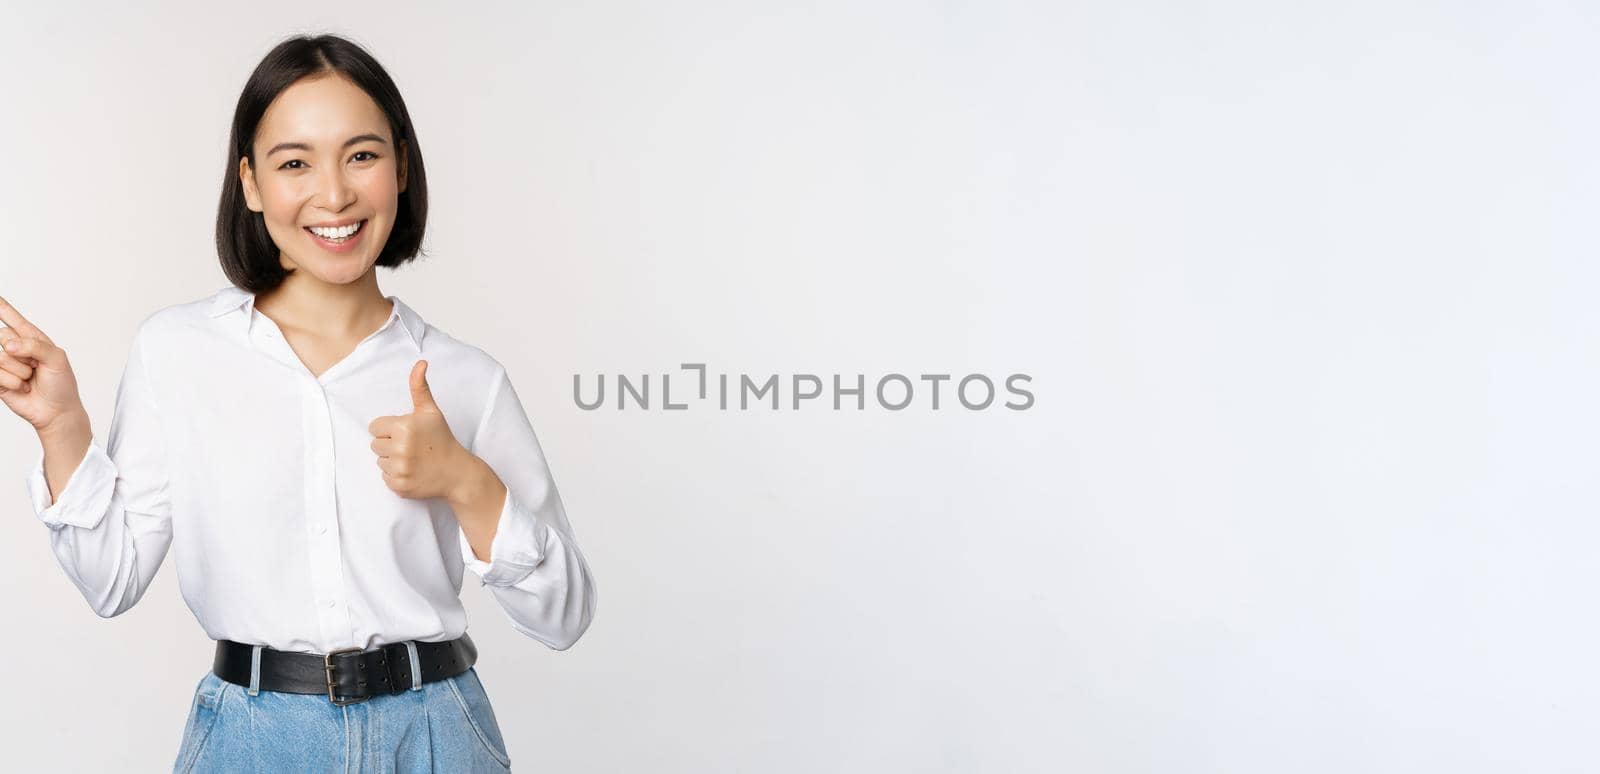 Image of young asian business woman, smiling while pointing finger left and showing thumbs up, recommending product, praise, standing over white background.